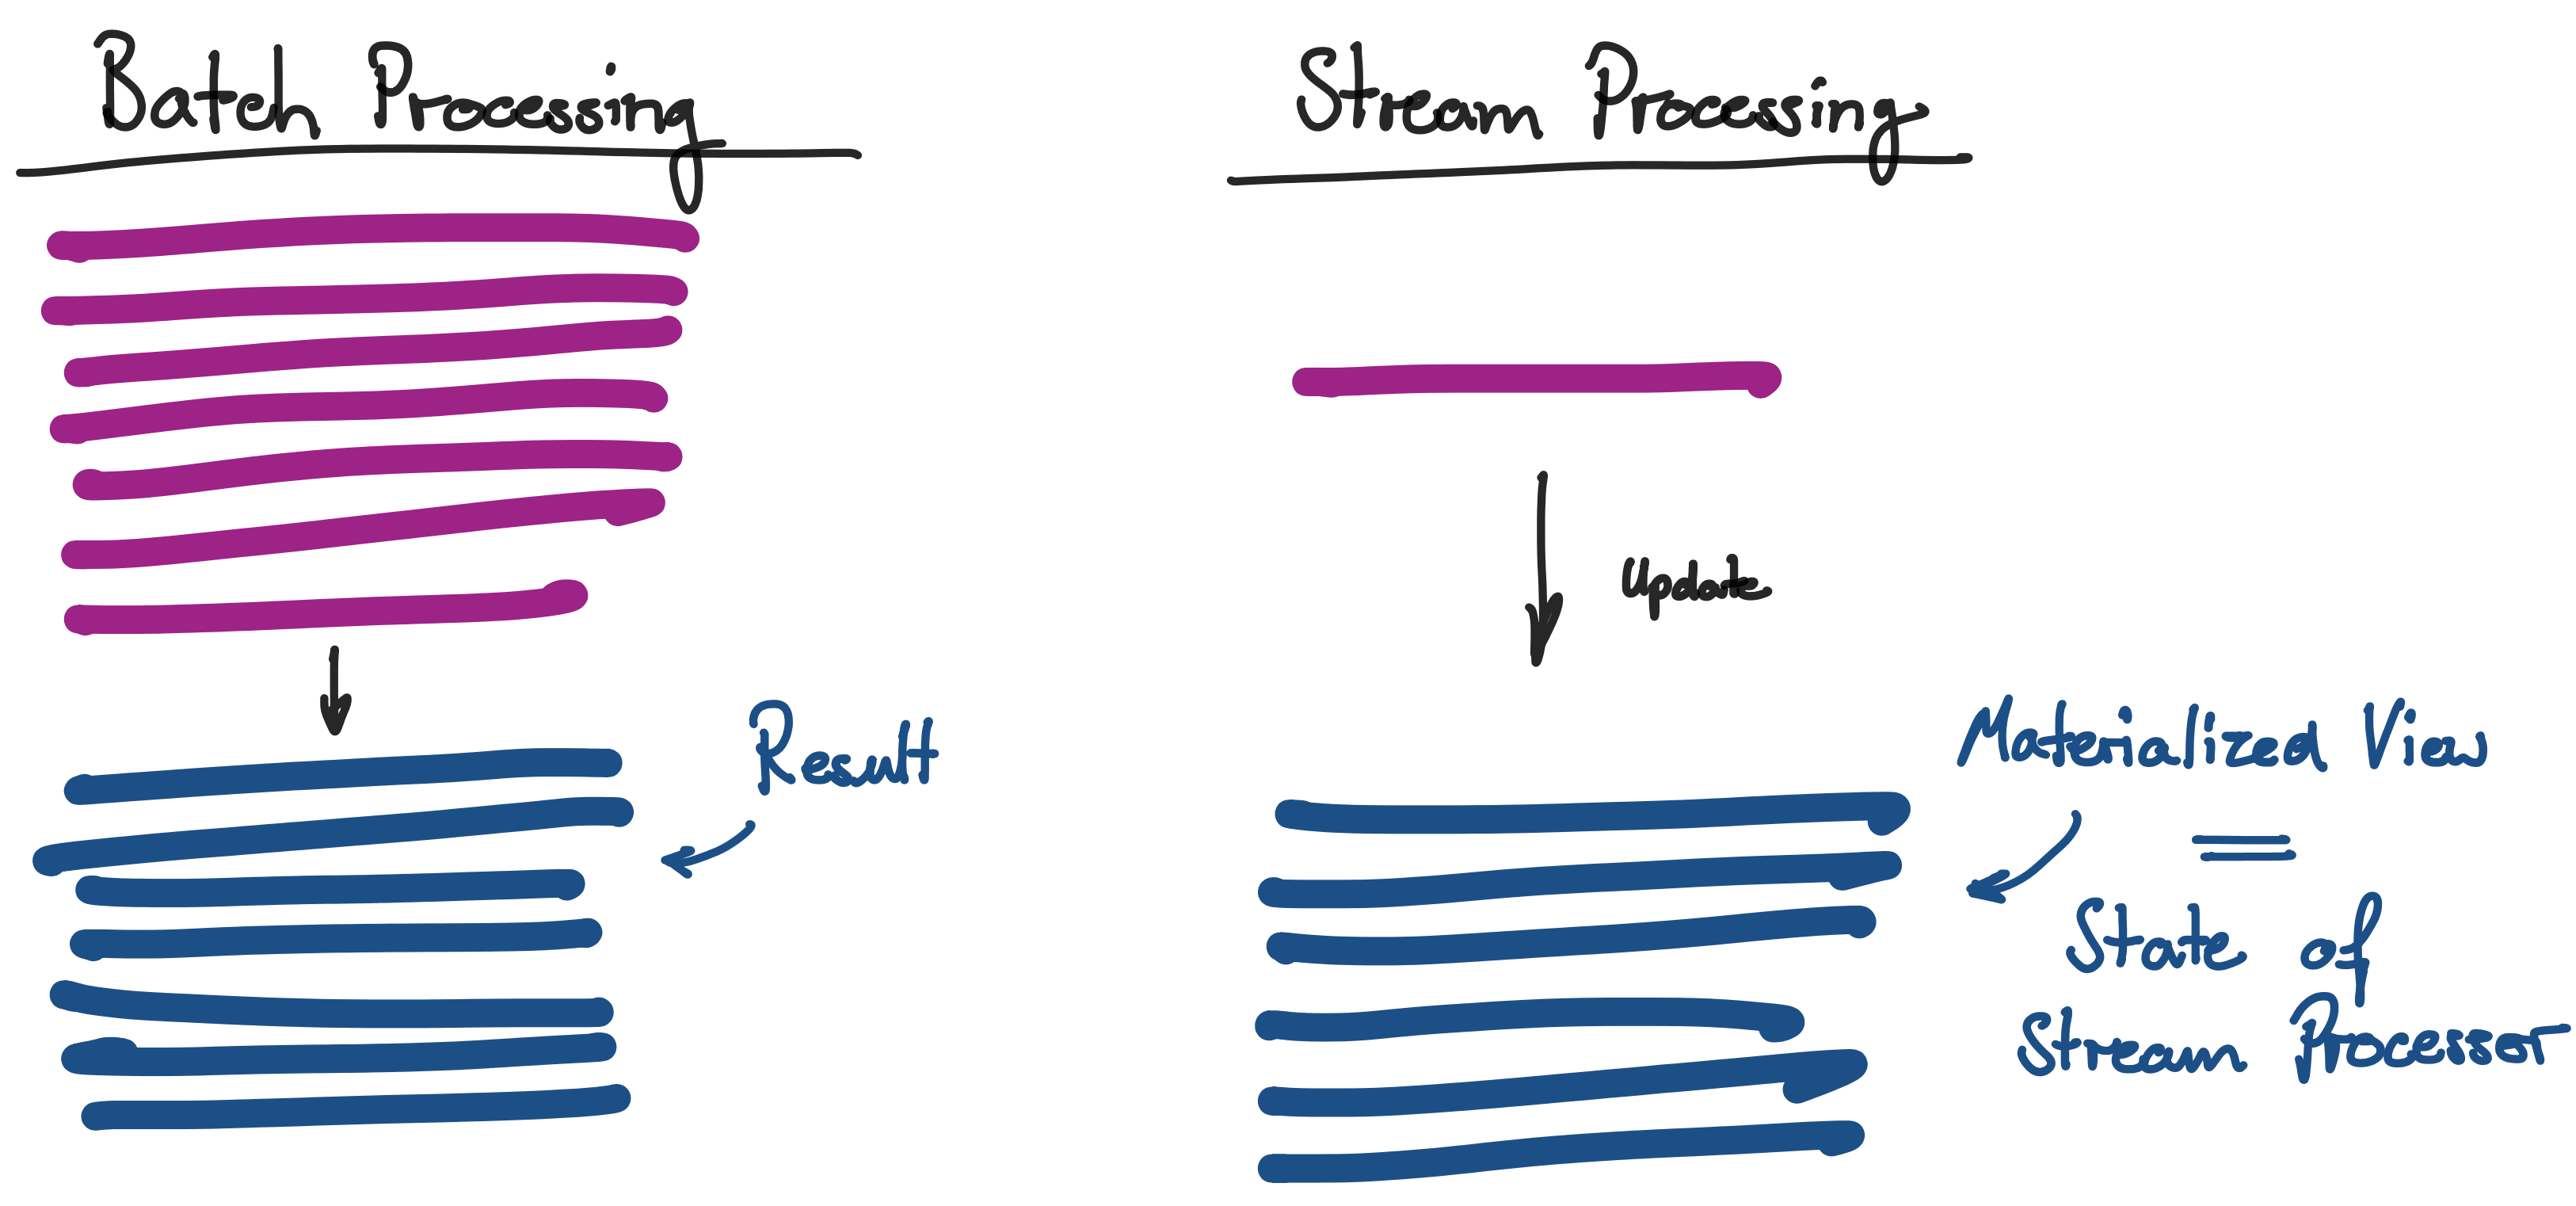 Comparision of batch and stream processing of event streams